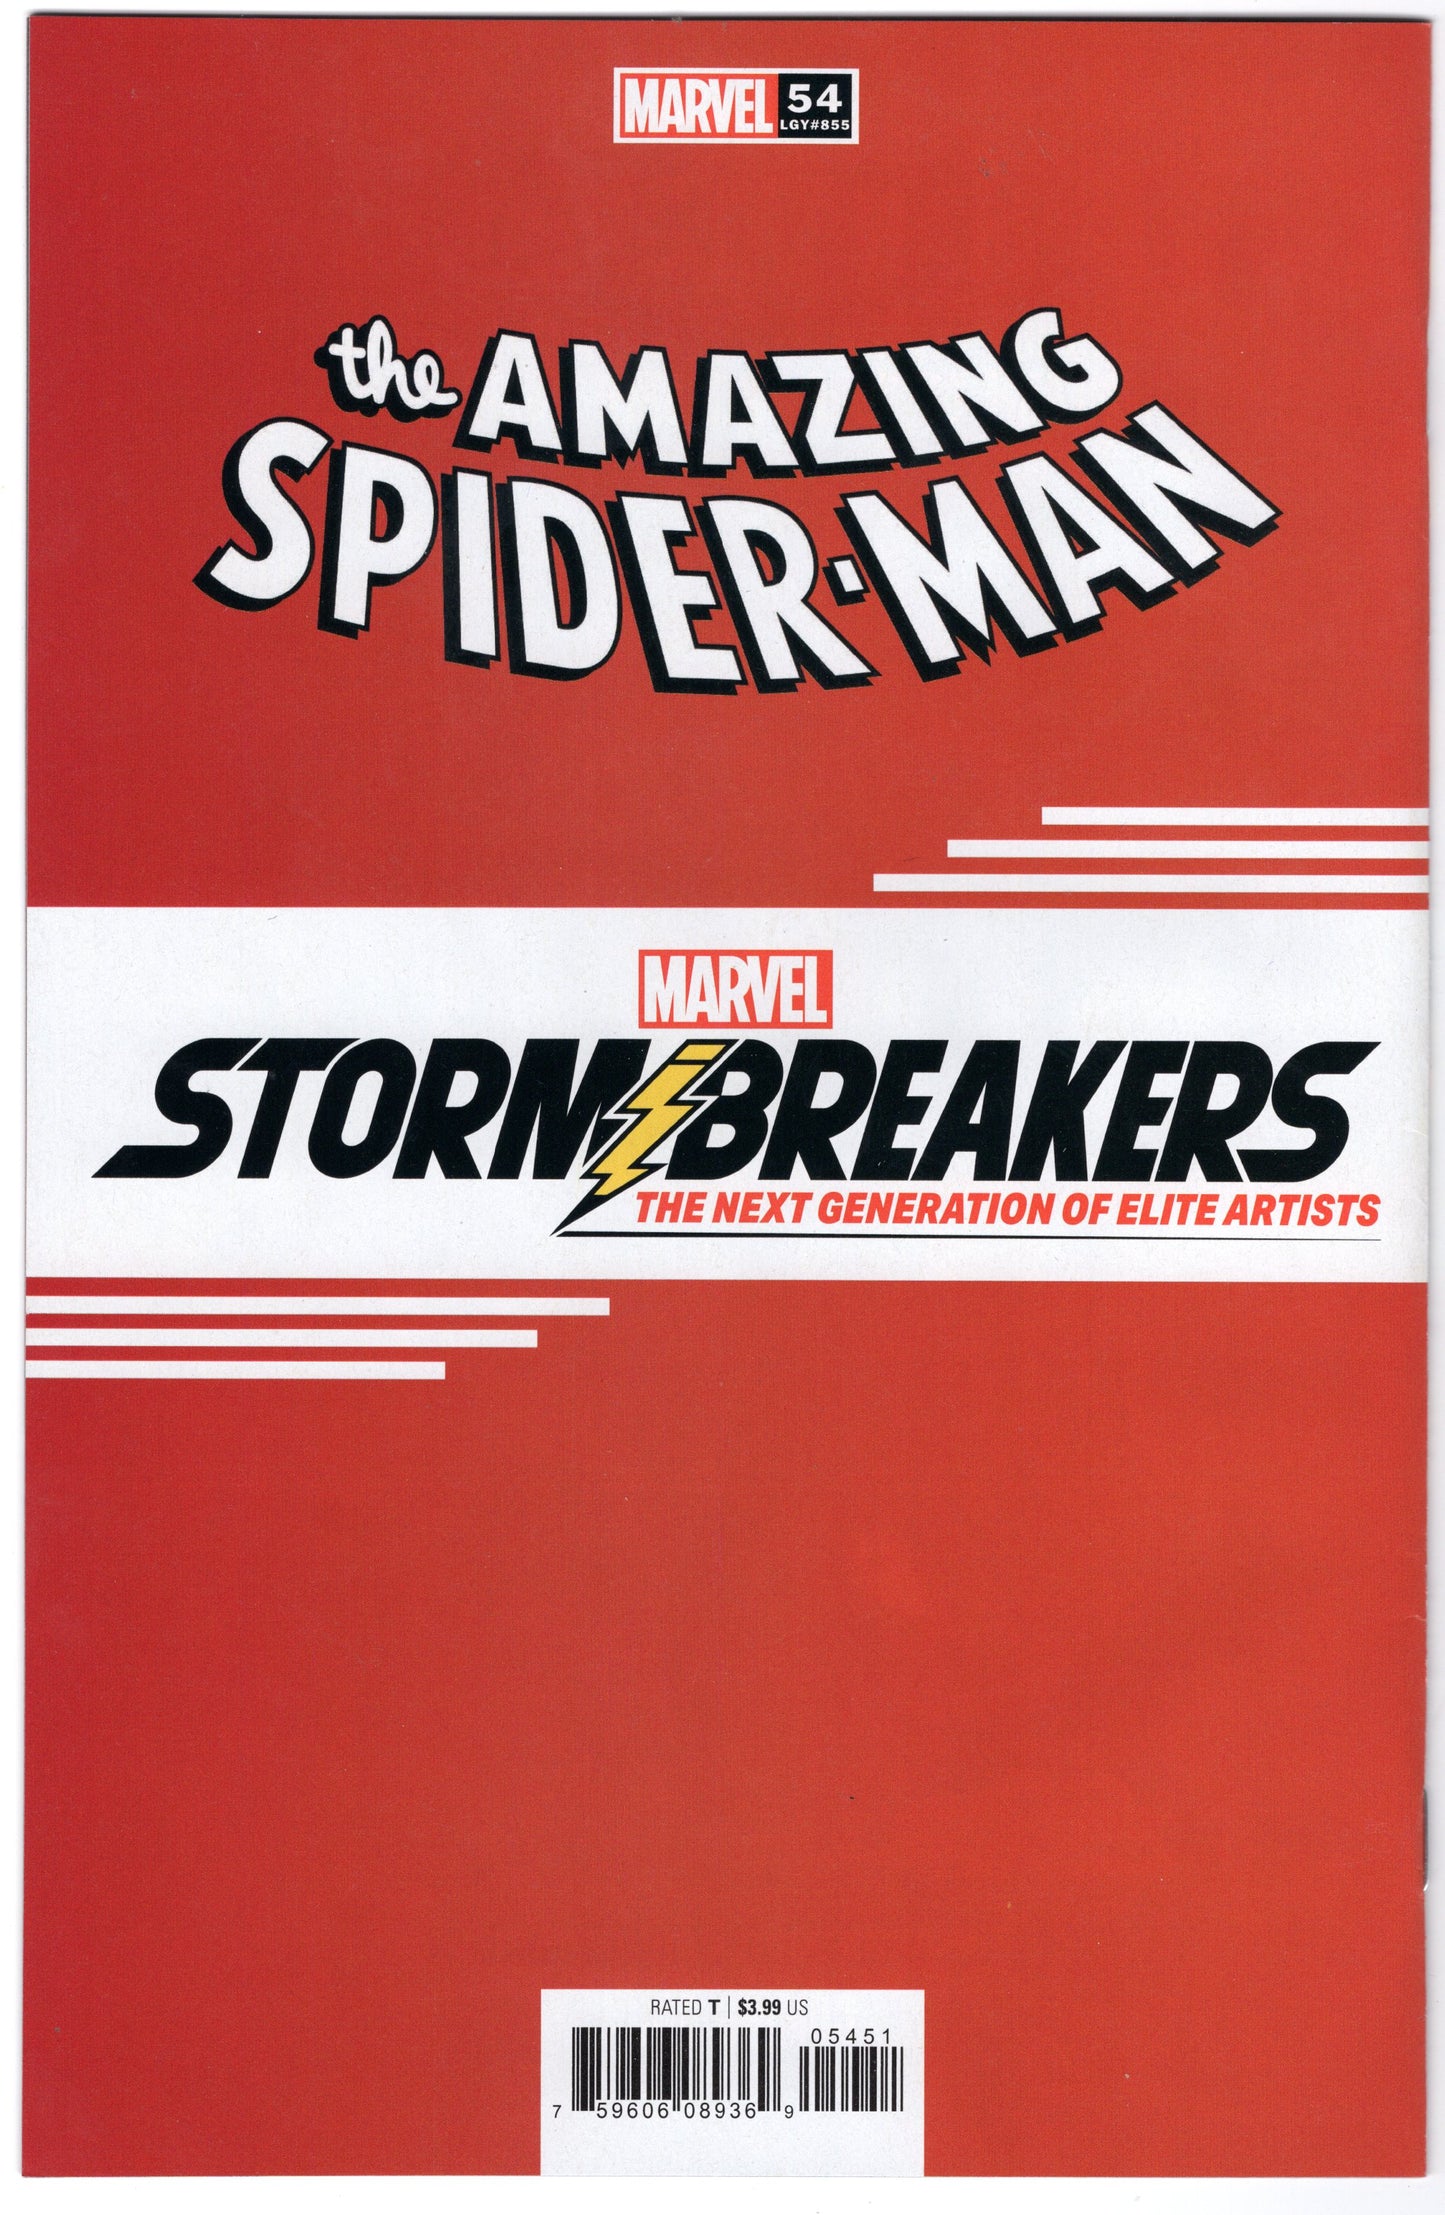 The Amazing Spider-Man - Issue #54 "Stormbreaker - Variant Cover" (Feb. 2021 - Marvel Comics) NM